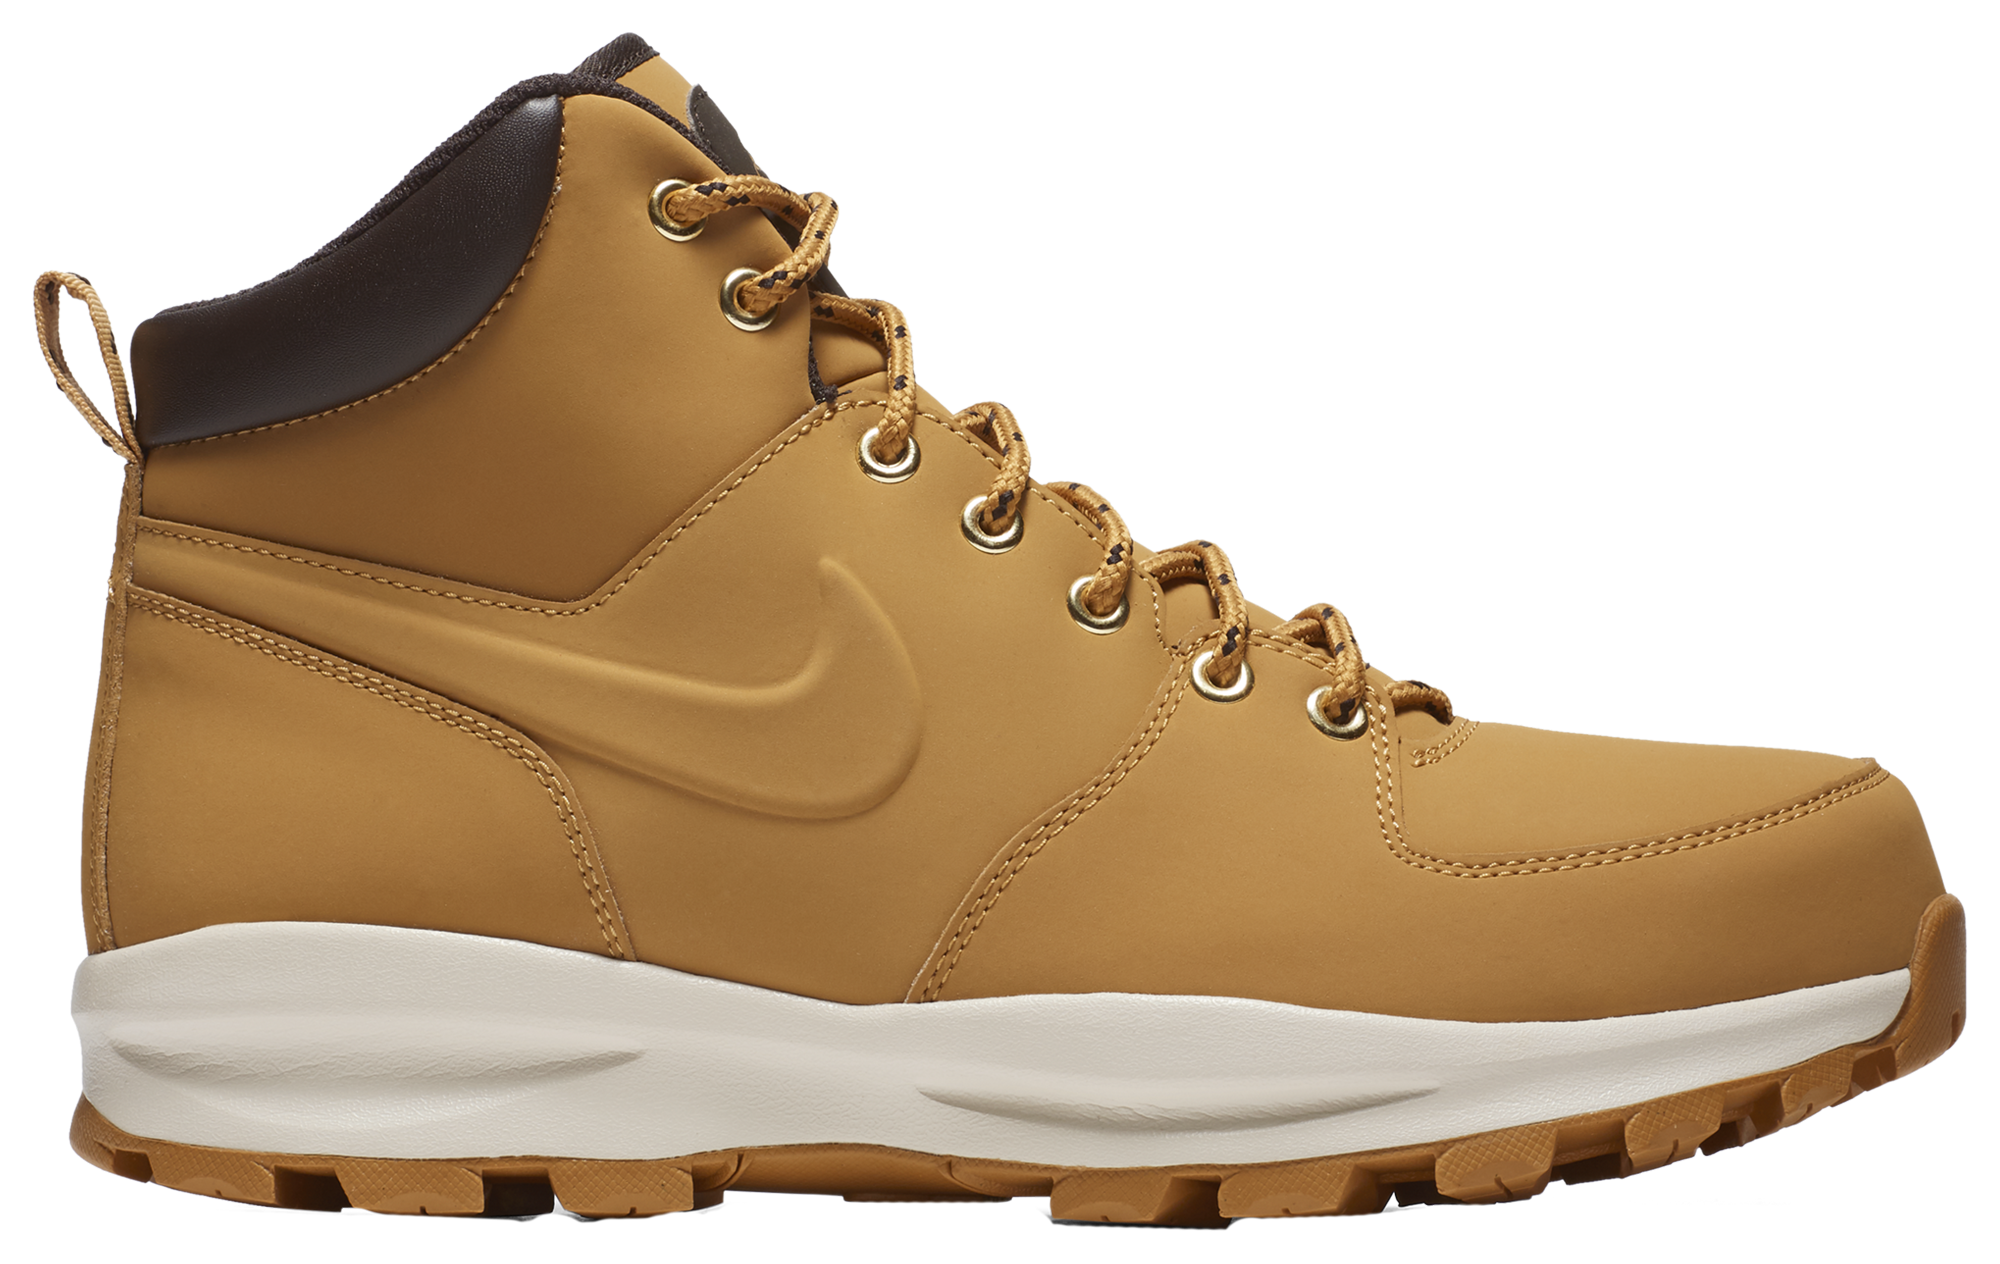 Men's Nike Boots | Eastbay